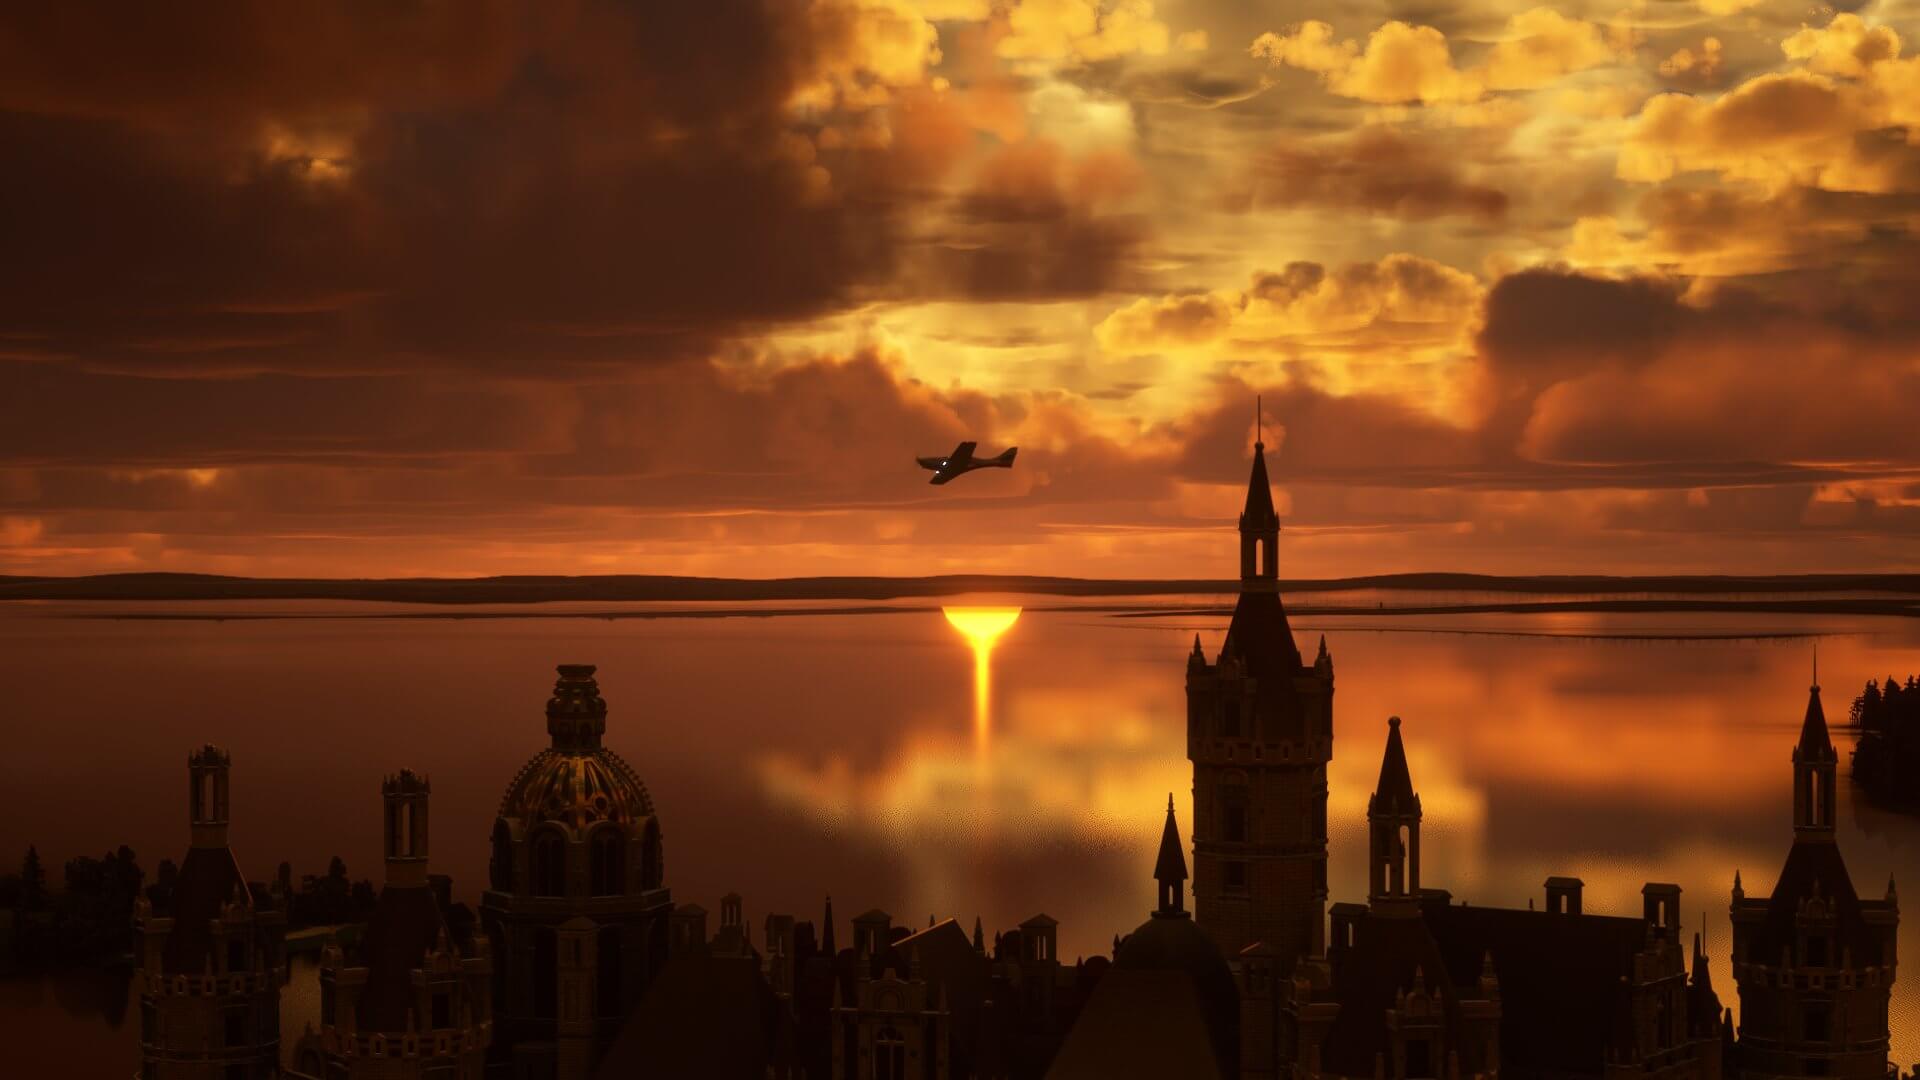 A GA aircraft passes over water, with the silhouette of a city in the foreground during golden hour.